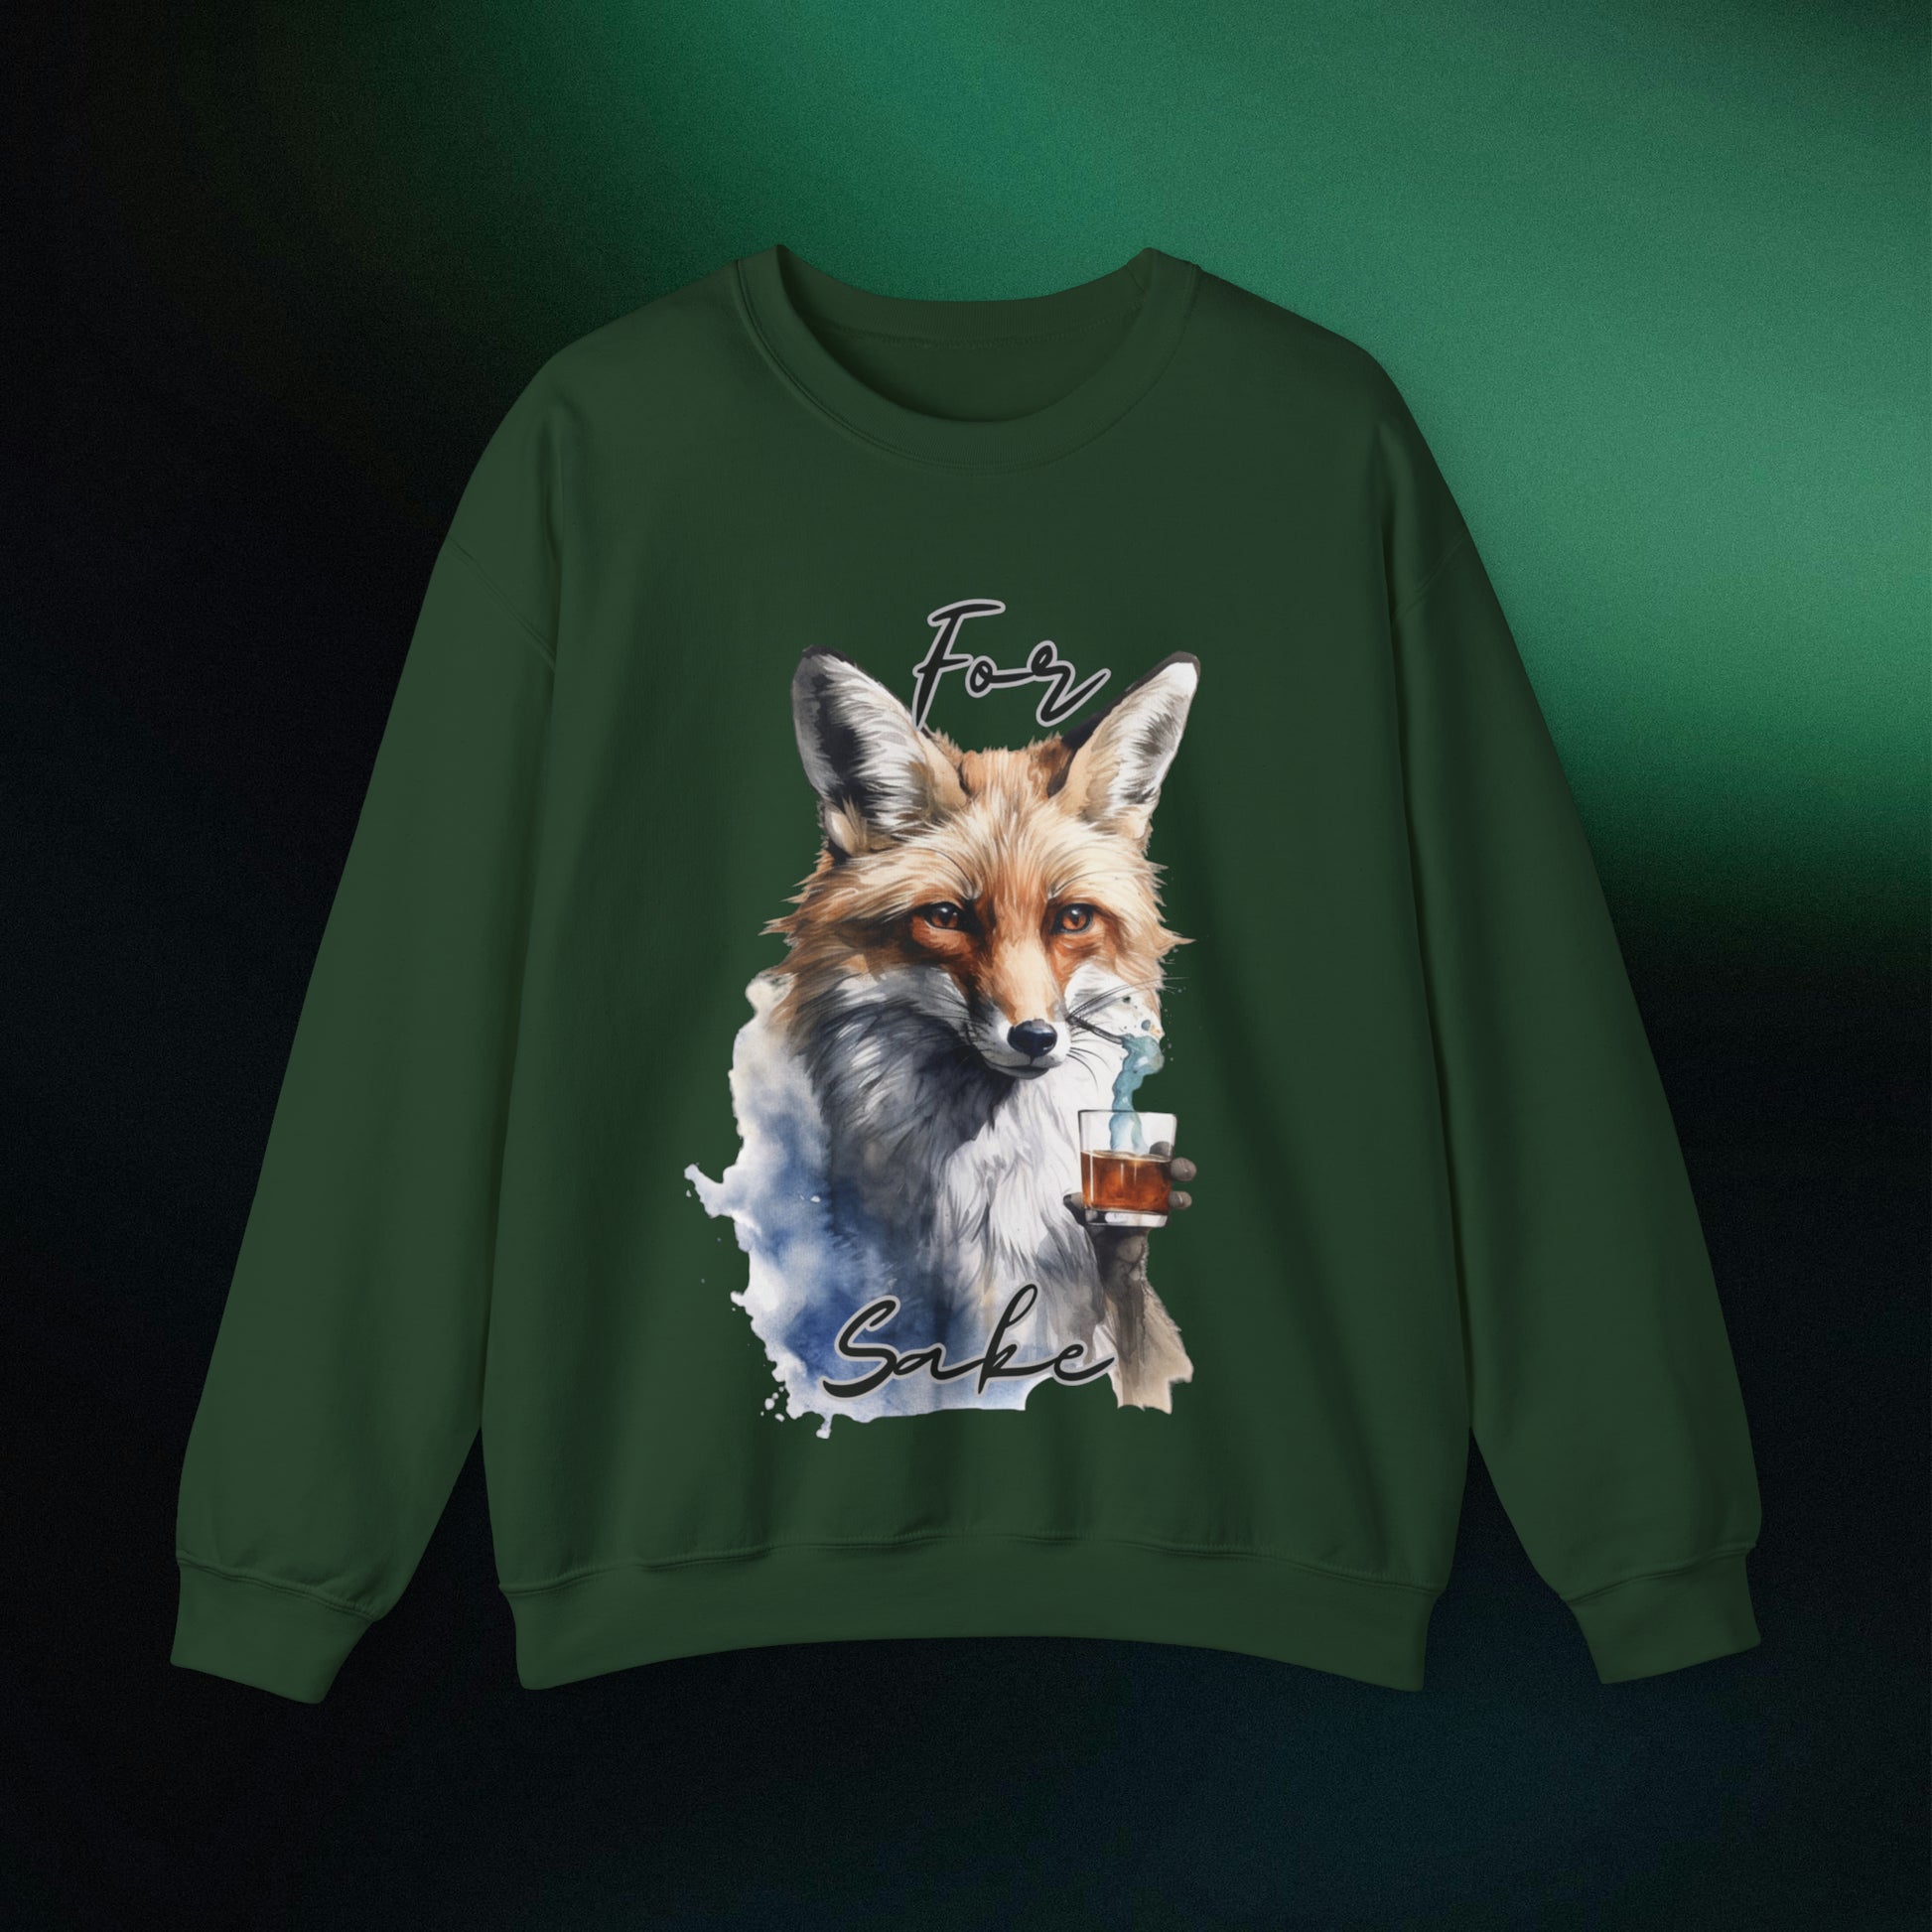 For Fox Sake: Funny Fox Sweatshirt | Gift for Fox Lover | Animal Lover Shirt - Cute Fox Gift for Nature Enthusiasts Sweatshirt S Forest Green 